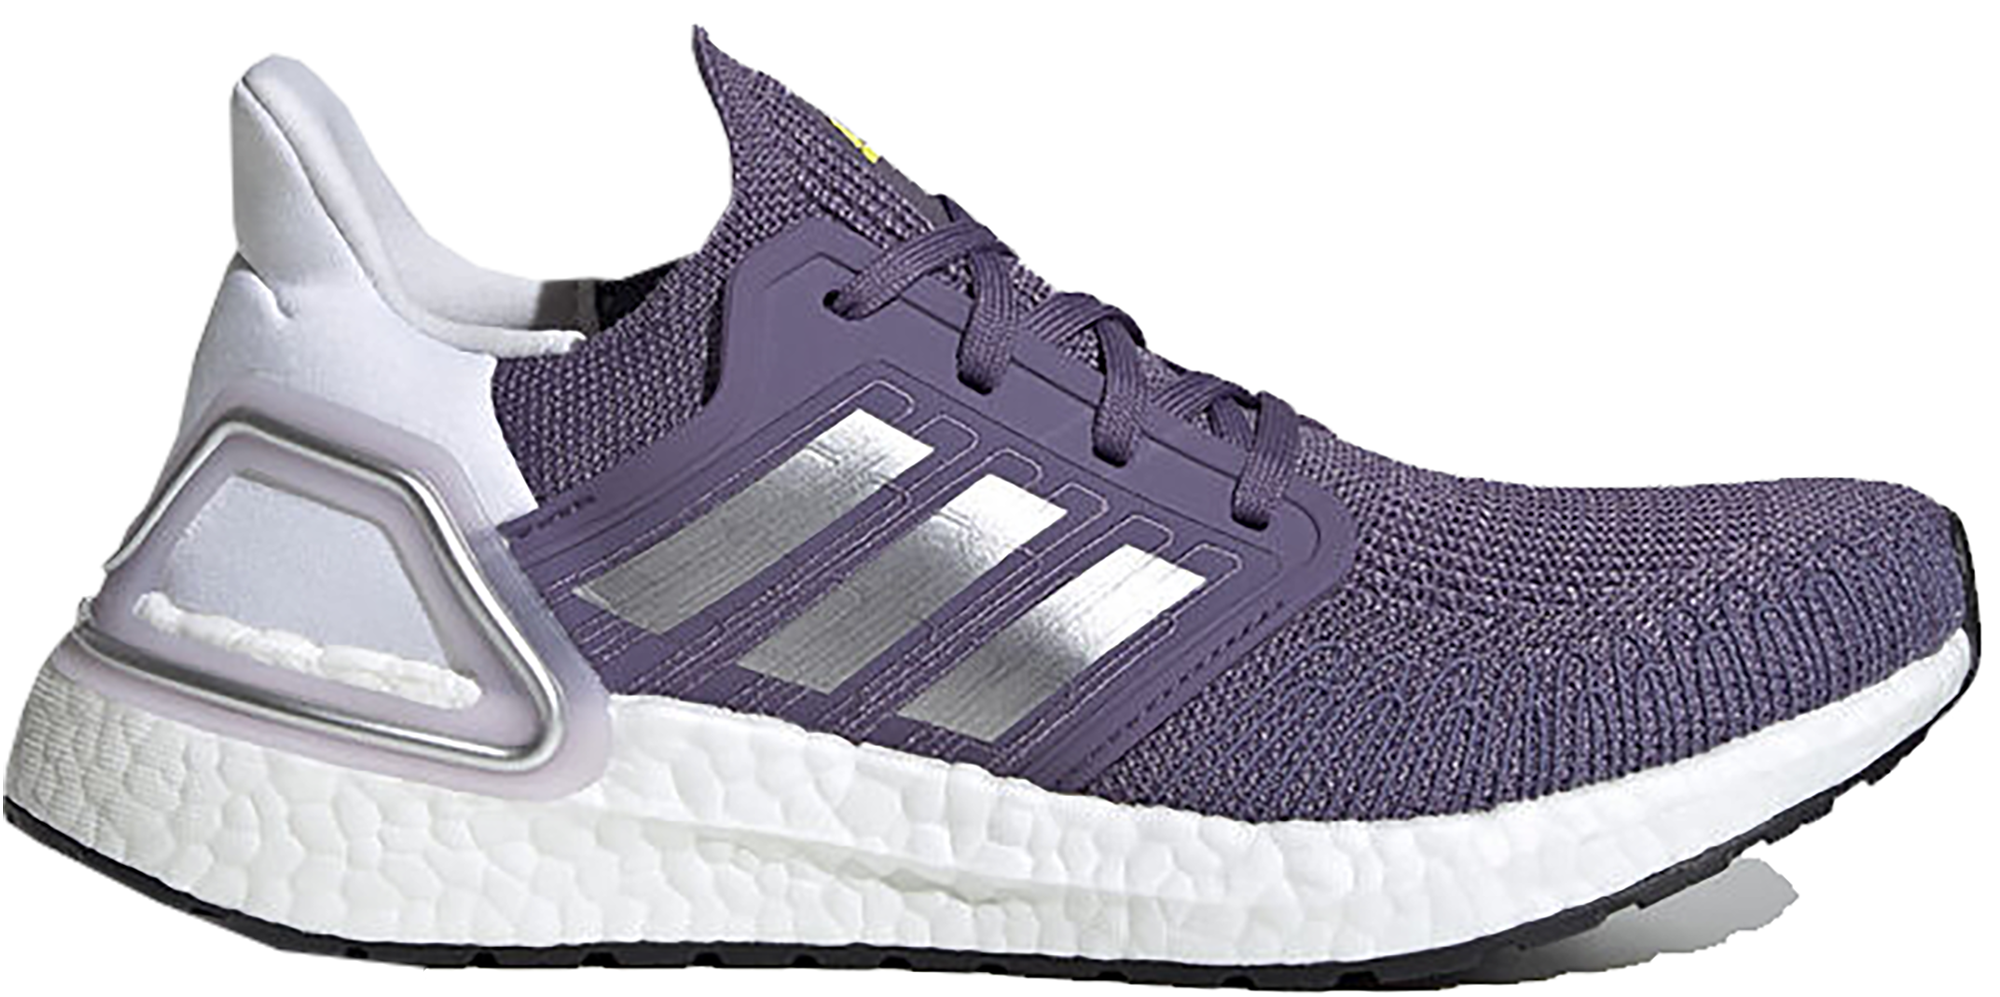 white and purple ultra boost